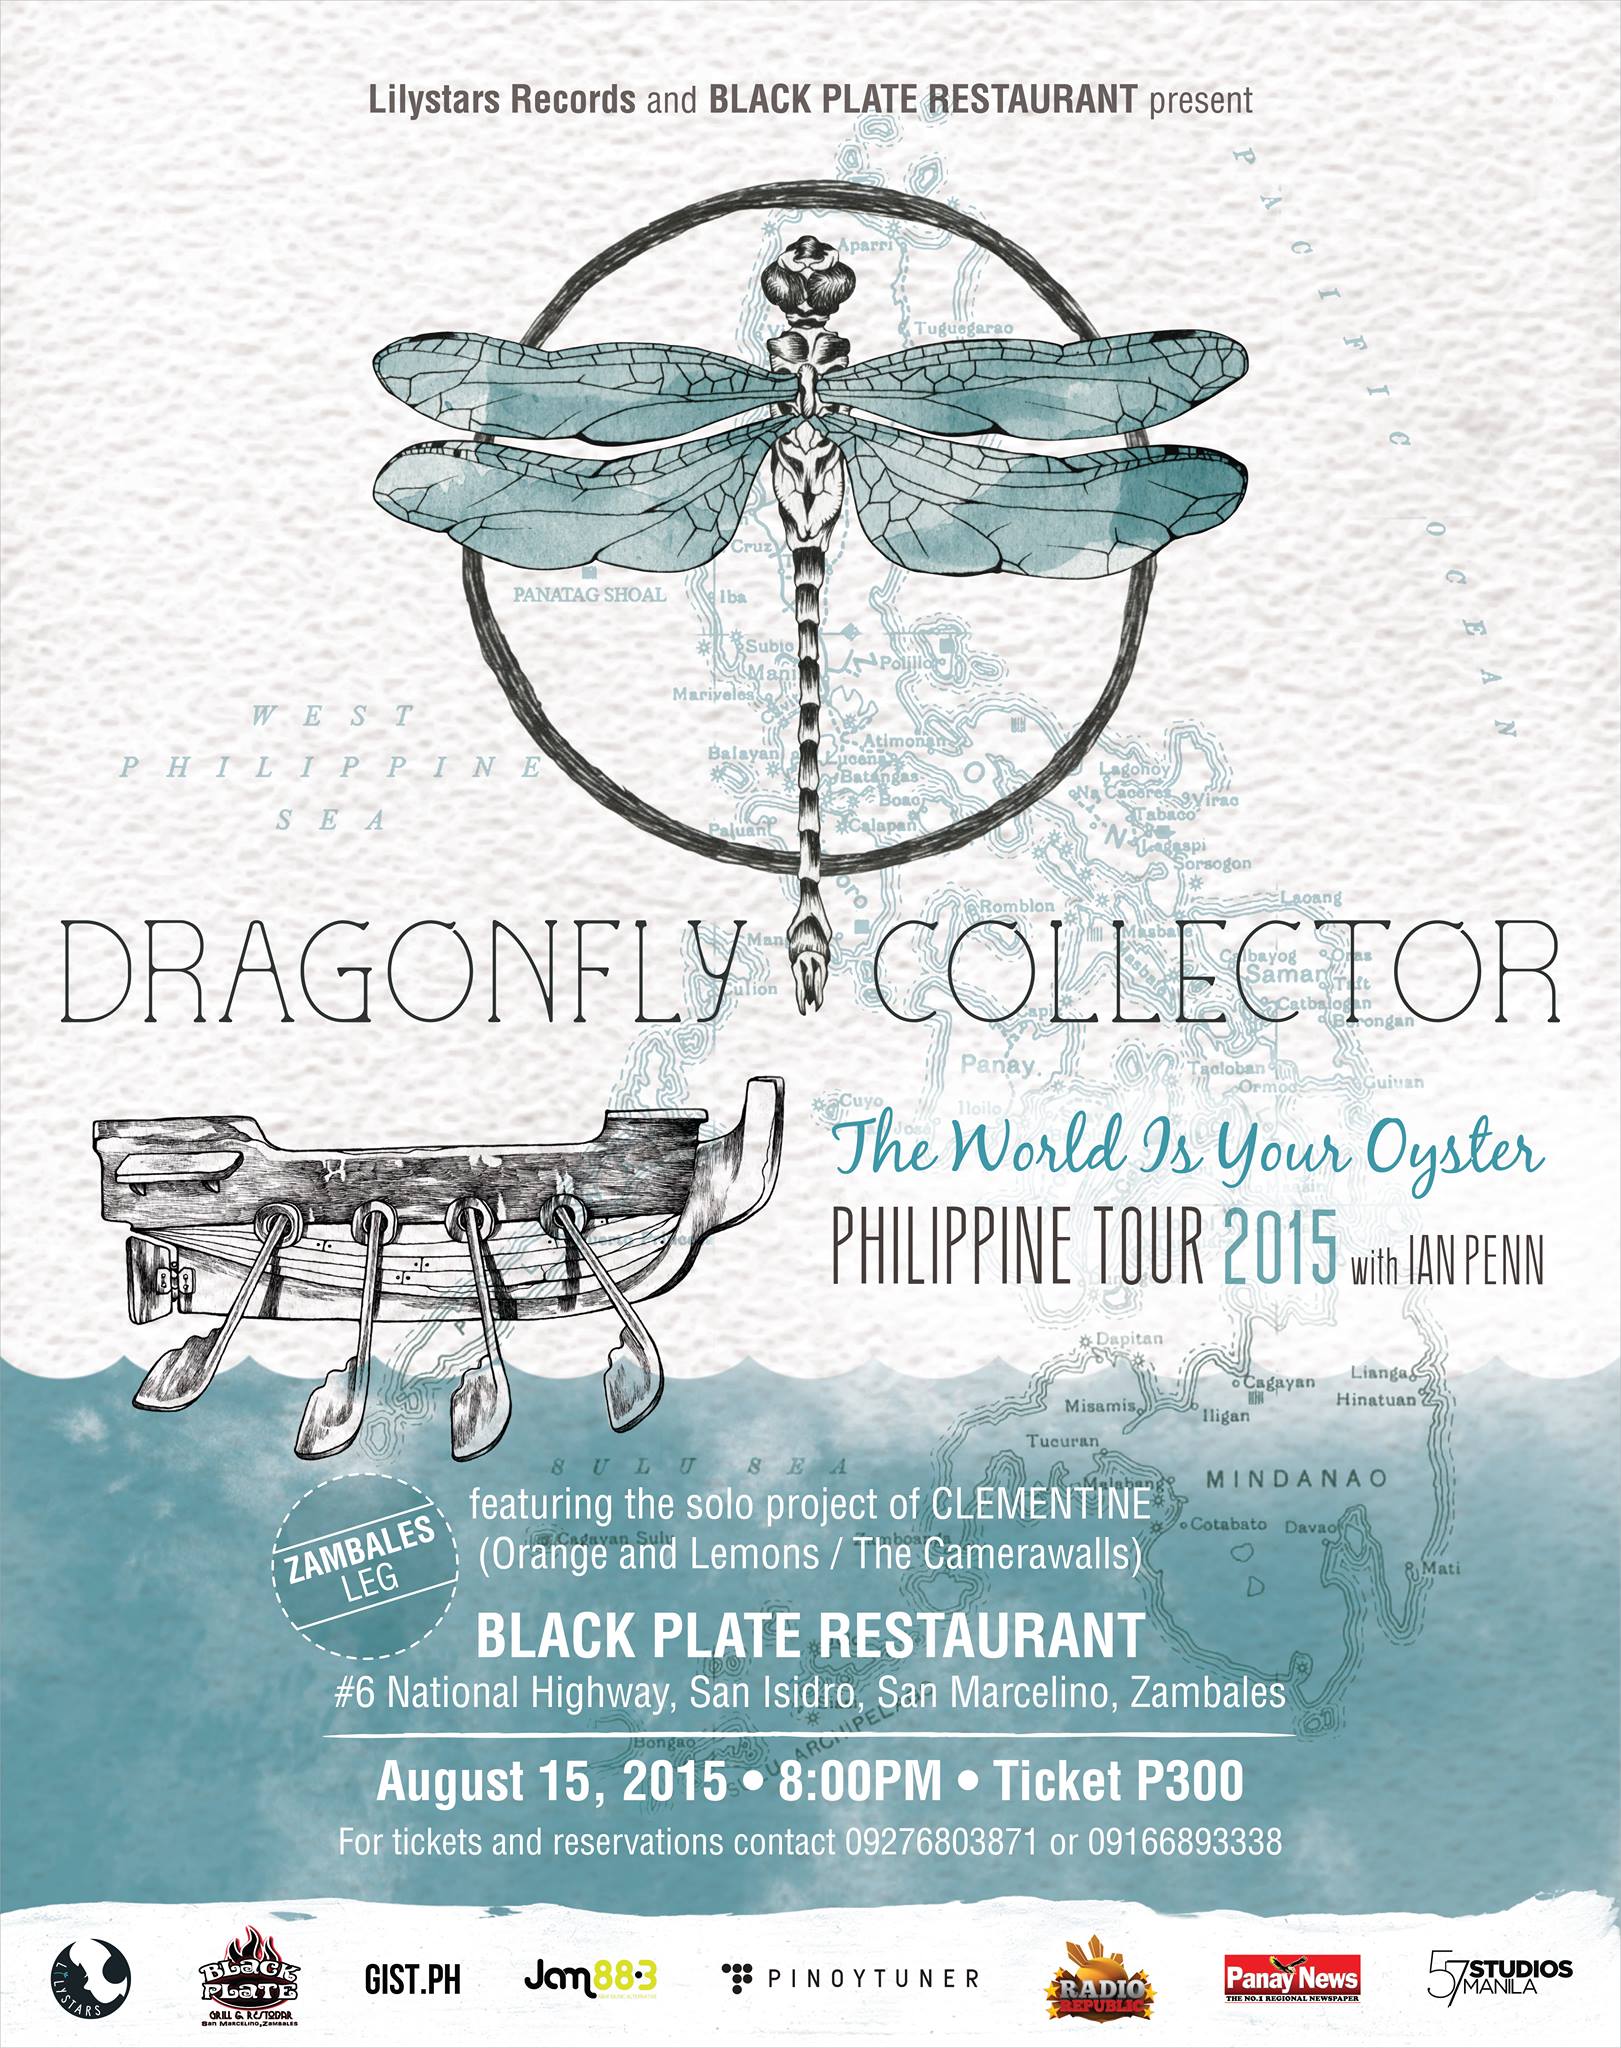 DRAGONFLY COLLECTOR: The World Is Your Oyster Philippine Tour 2015 [Zambales Leg]     Saturday, August 15     at 8:00pm     4 days from now · 89°F / 77°F Thunderstorm     	     Show Map     Black Plate     San Marcelino, Zambales Lilystars Records and Black Plate Restaurant present DRAGONFLY COLLECTOR The World Is Your Oyster Philippine Tour 2015 (Zambales Leg) with Ian Penn featuring the solo project of Clem Castro aka Clementine (Orange & Lemons / The Camerawalls) BLACK PLATE RESTAURANT #6 National Highway, San Isidro, San Marcelino, Zambales August 15, 2015, 8:00 PM Tickets: P300 For tickets and reservations contact Jessa 09276803871 or Karl 09166893338. Tour poster by Ige Trinidad Also brought to you by Jam 88.3, Pinoytuner, Radio Republic, Gist, Panay News and 57 Studios Manila